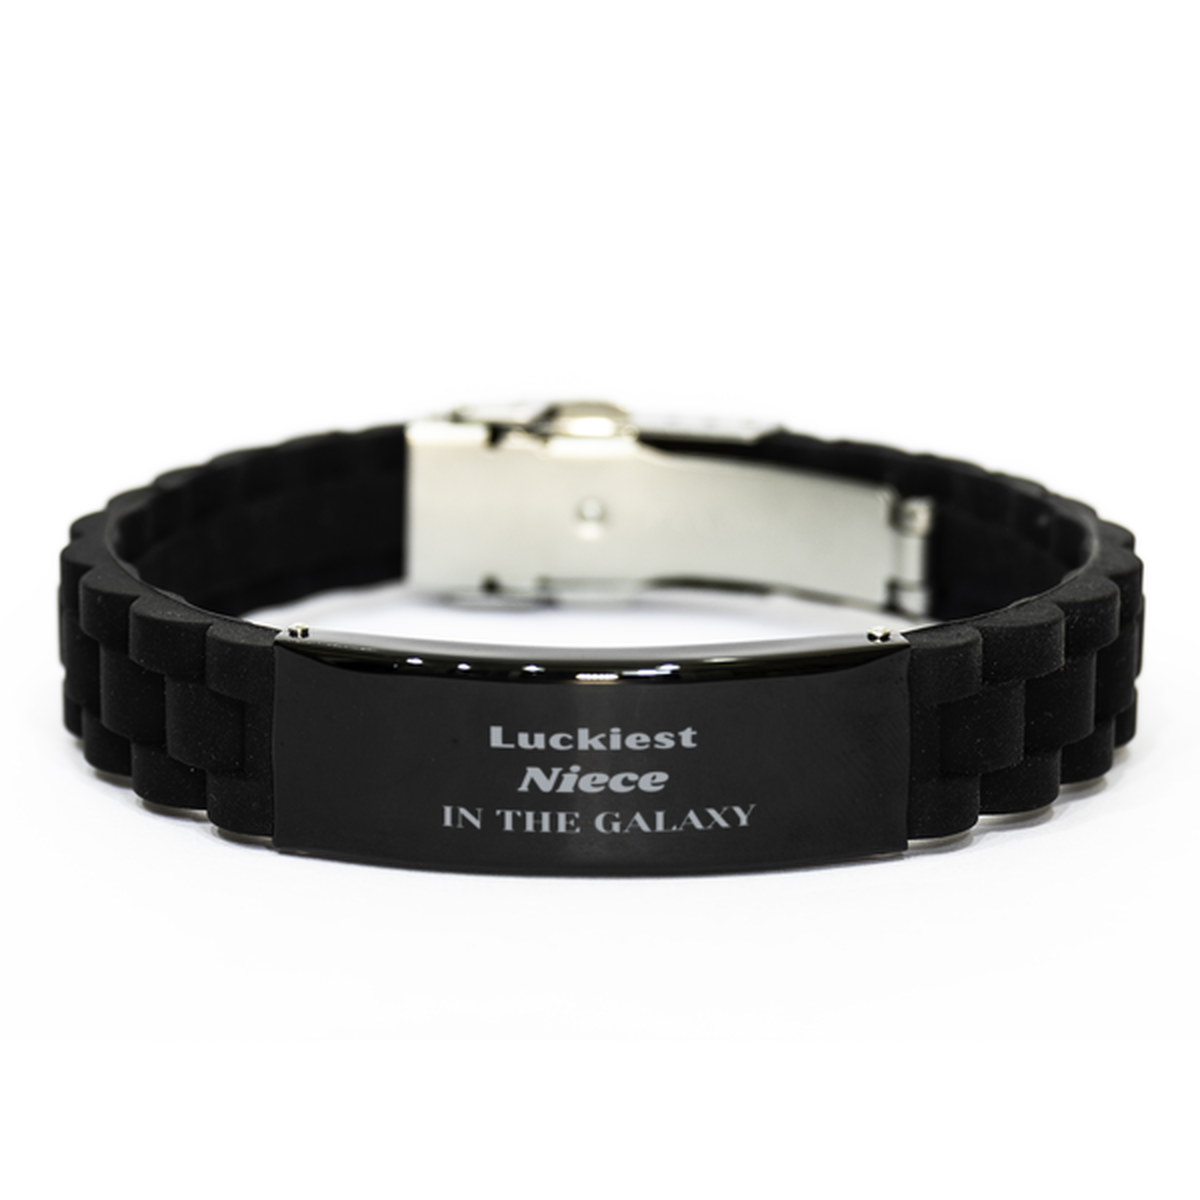 Luckiest Niece in the Galaxy, To My Niece Engraved Gifts, Christmas Niece Black Glidelock Clasp Bracelet Gifts, X-mas Birthday Unique Gifts For Niece Men Women